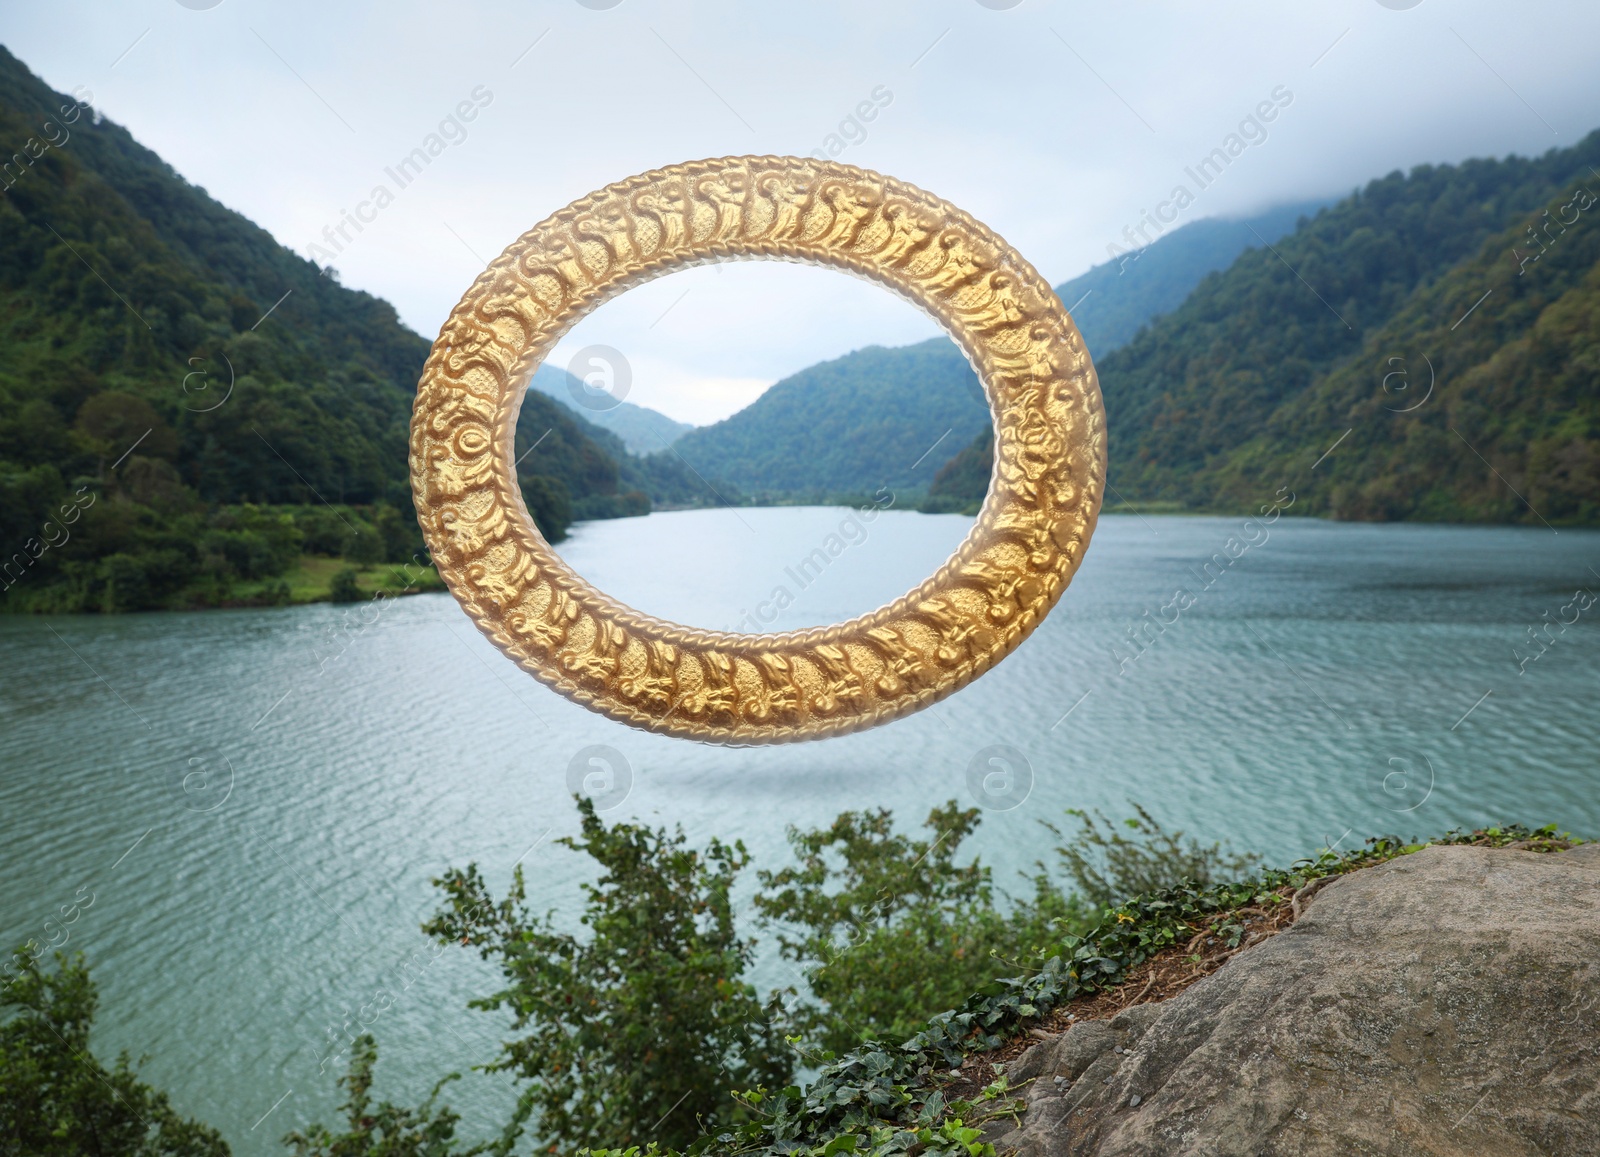 Image of Vintage frame and lake between mountains under cloudy sky